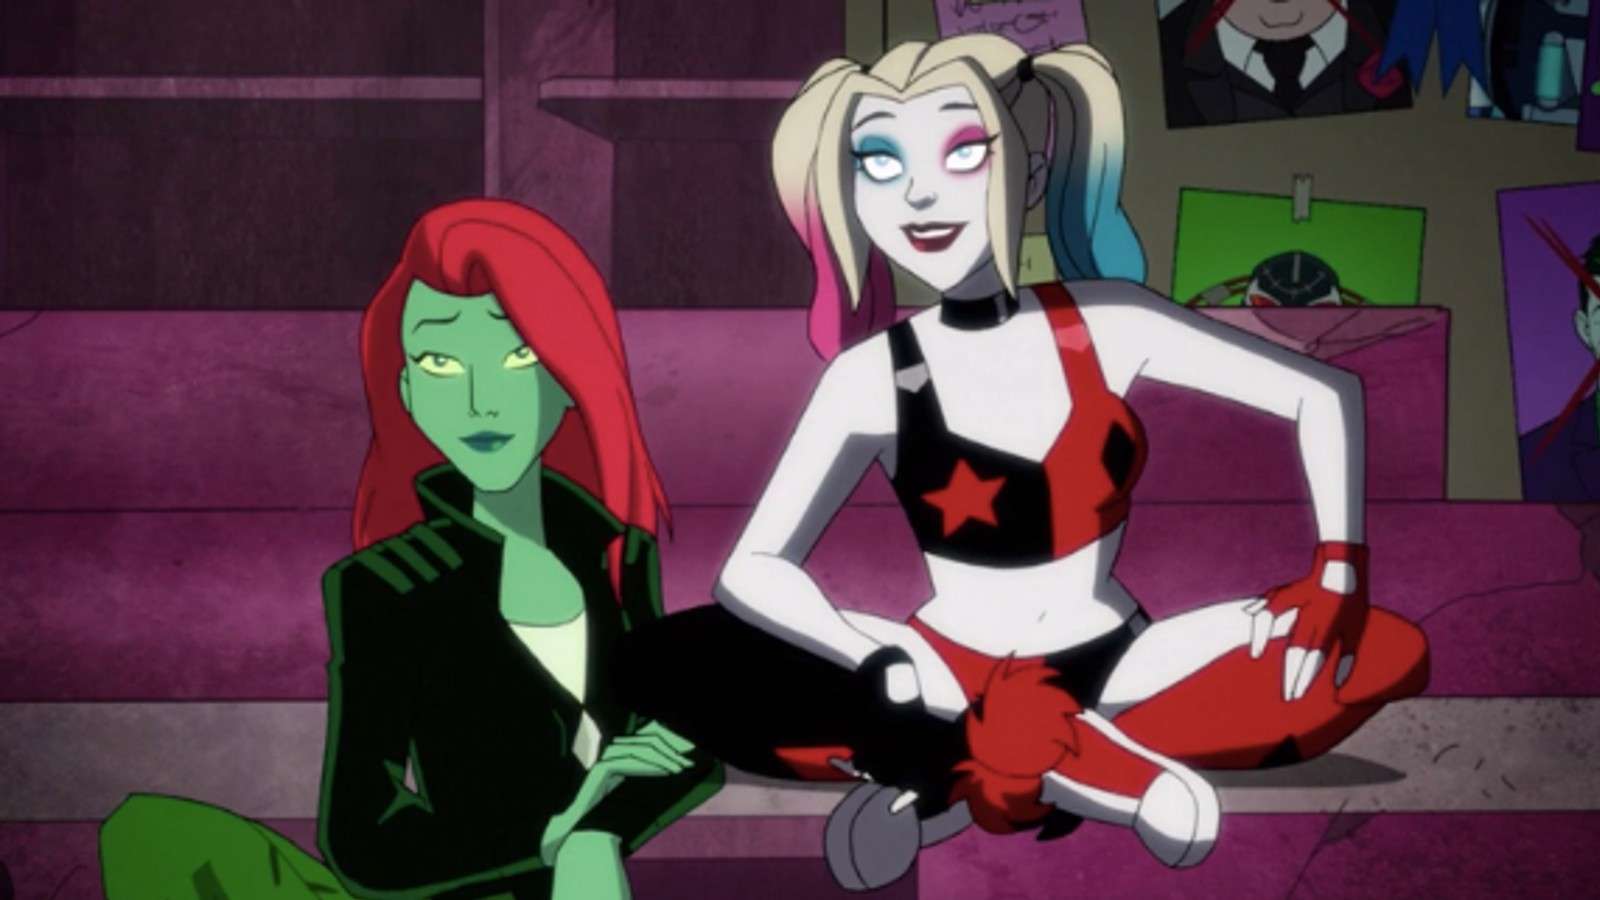 Harley Quinn and Poison Ivy sit side by side